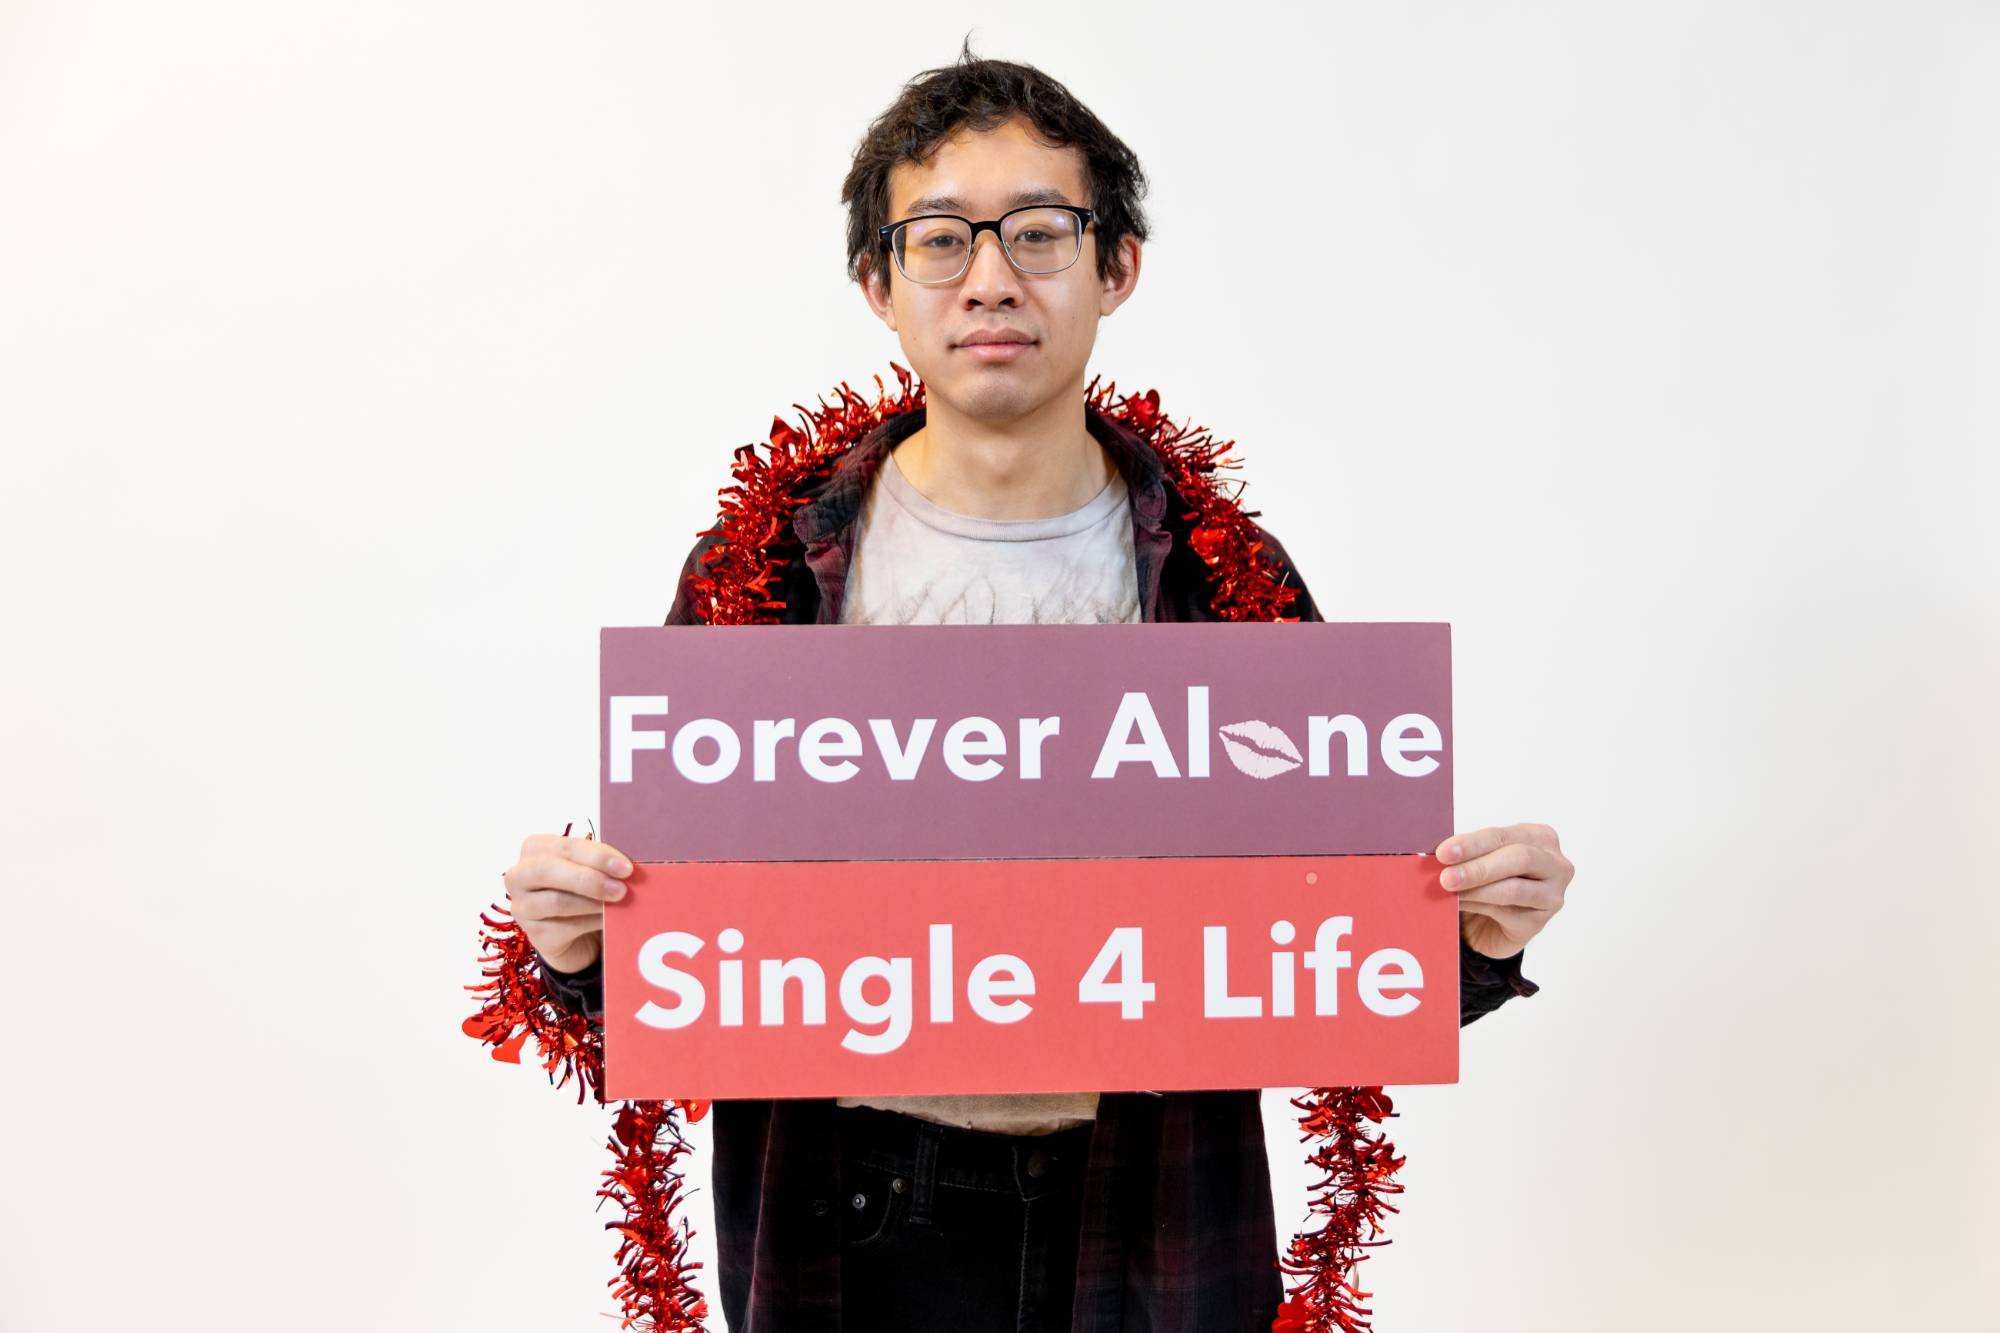 Student holding "forever alone" signs at Valentine's day photoshoot